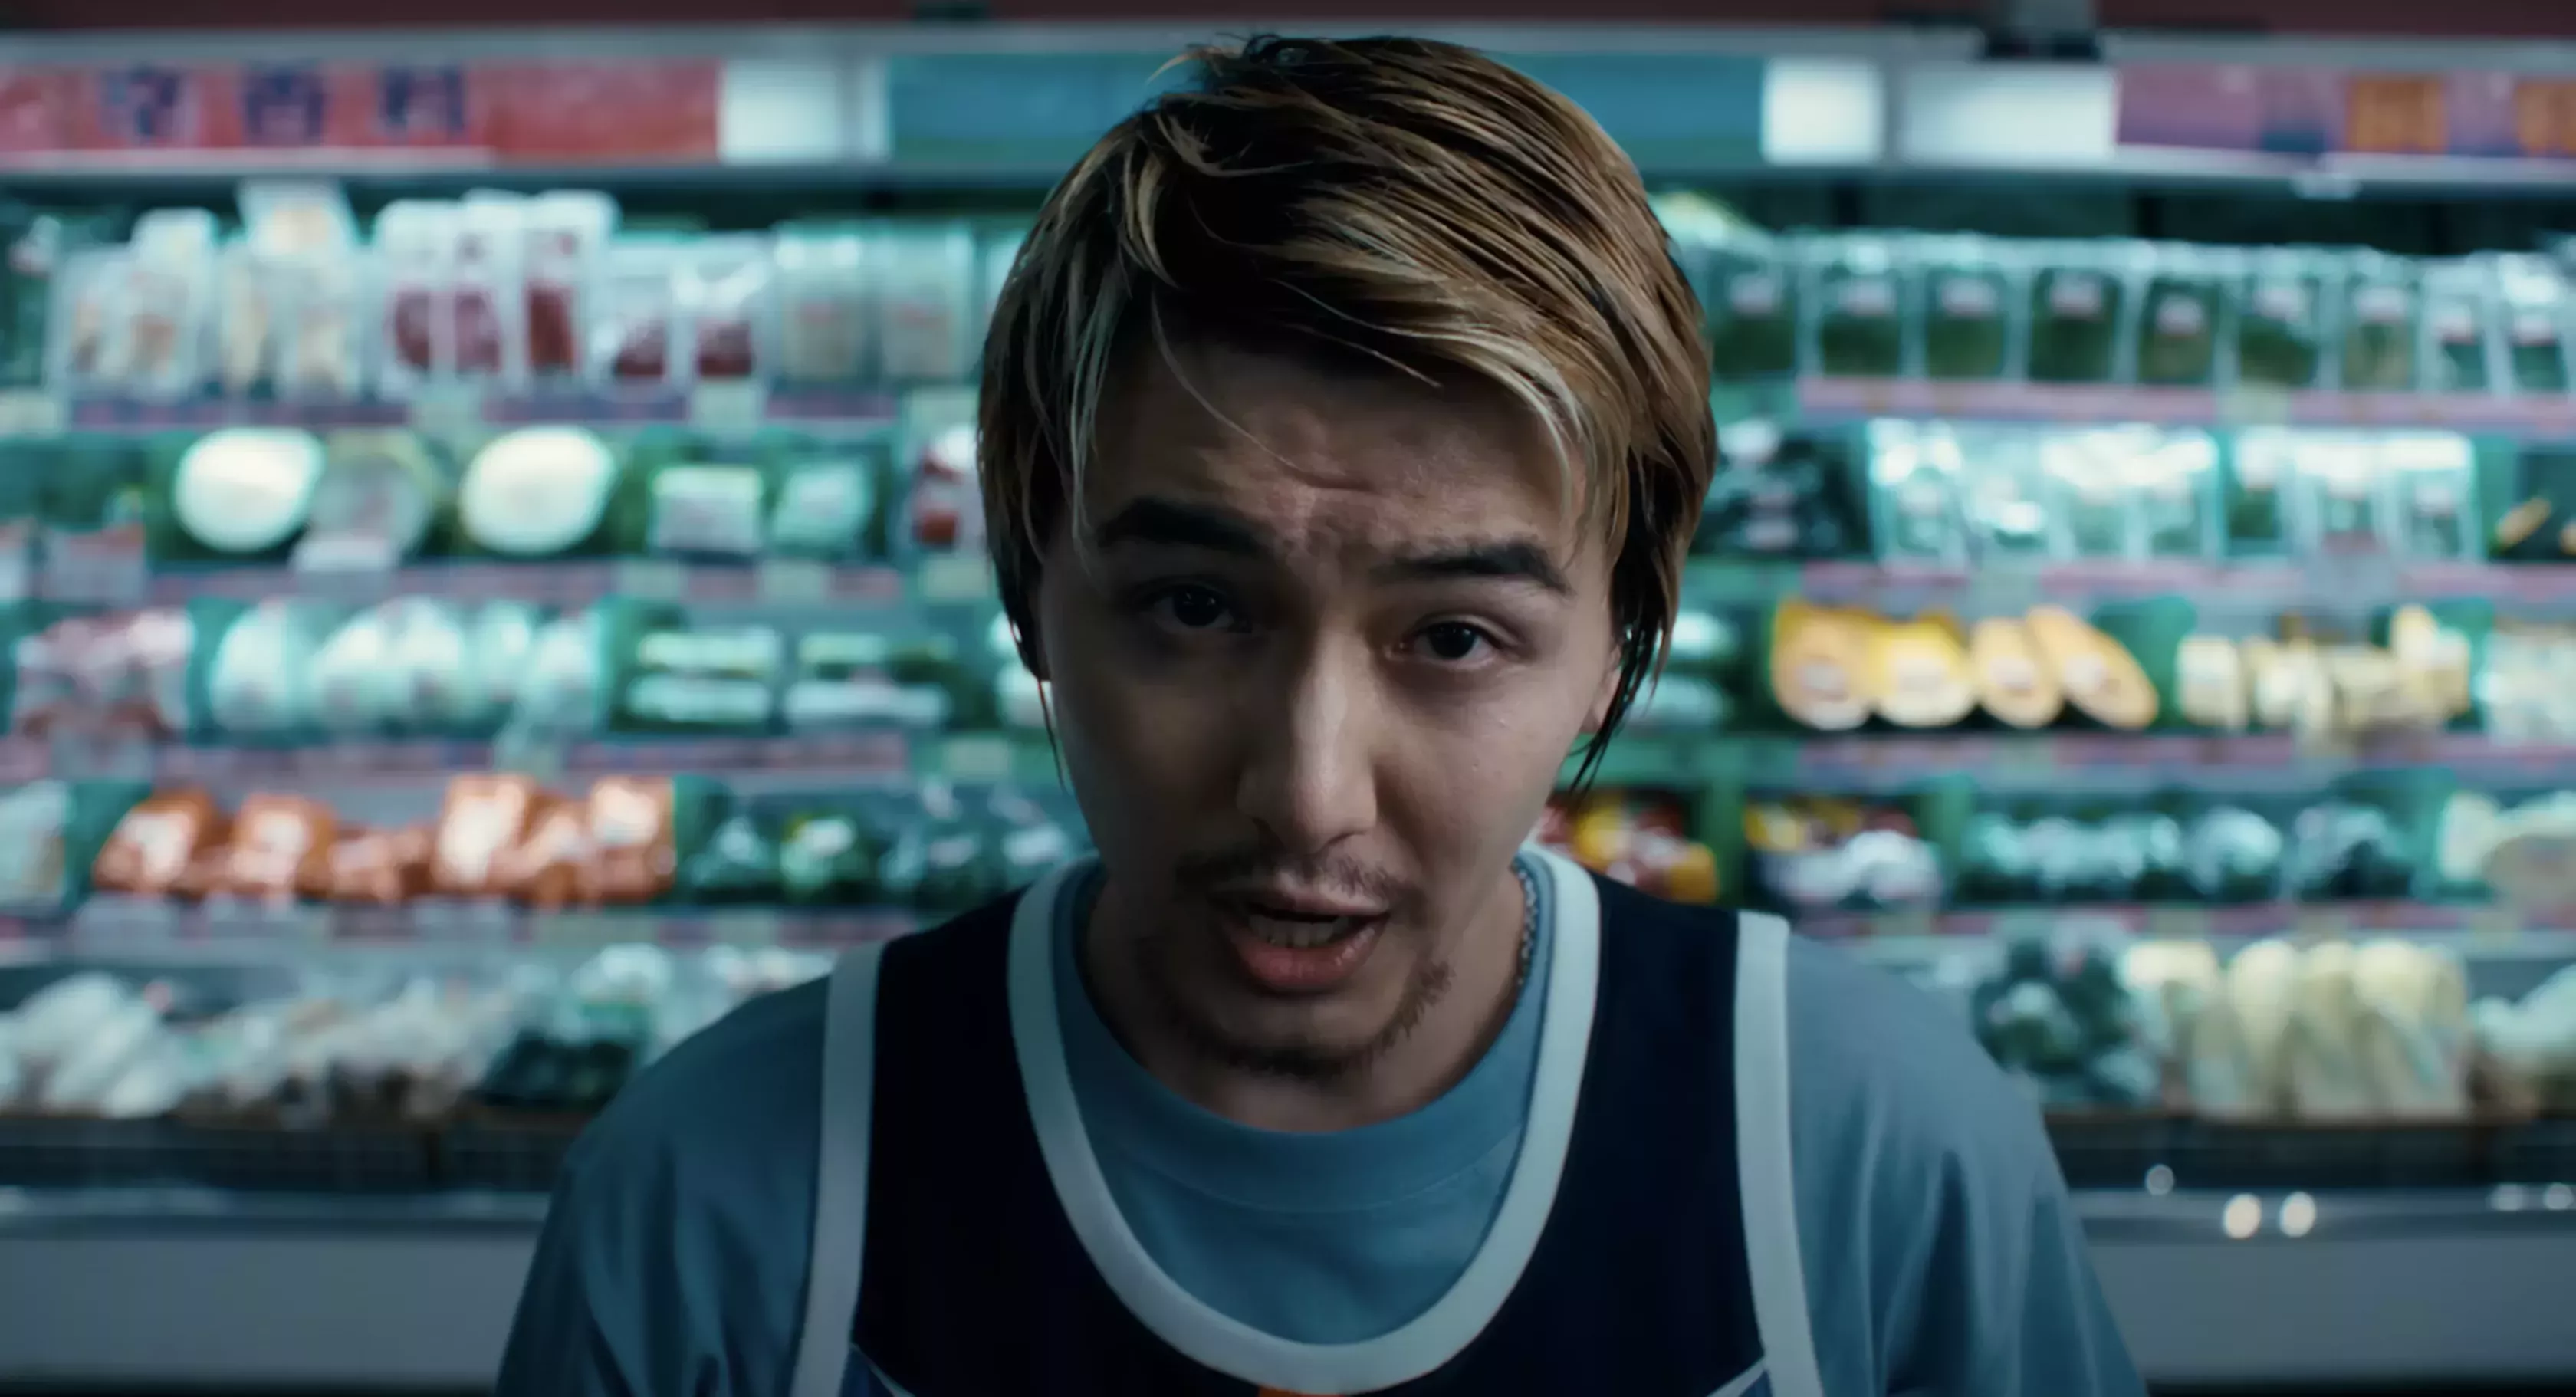 J-pop singer Fujii Kaze, with long bleached hair and a thin mustache smiles while performing in the music video for "Workin' Hard." He wears a navy jersey over a light blue t-shirt and stands in the middle of a grocery store, with the produce aisle blurred behind him.